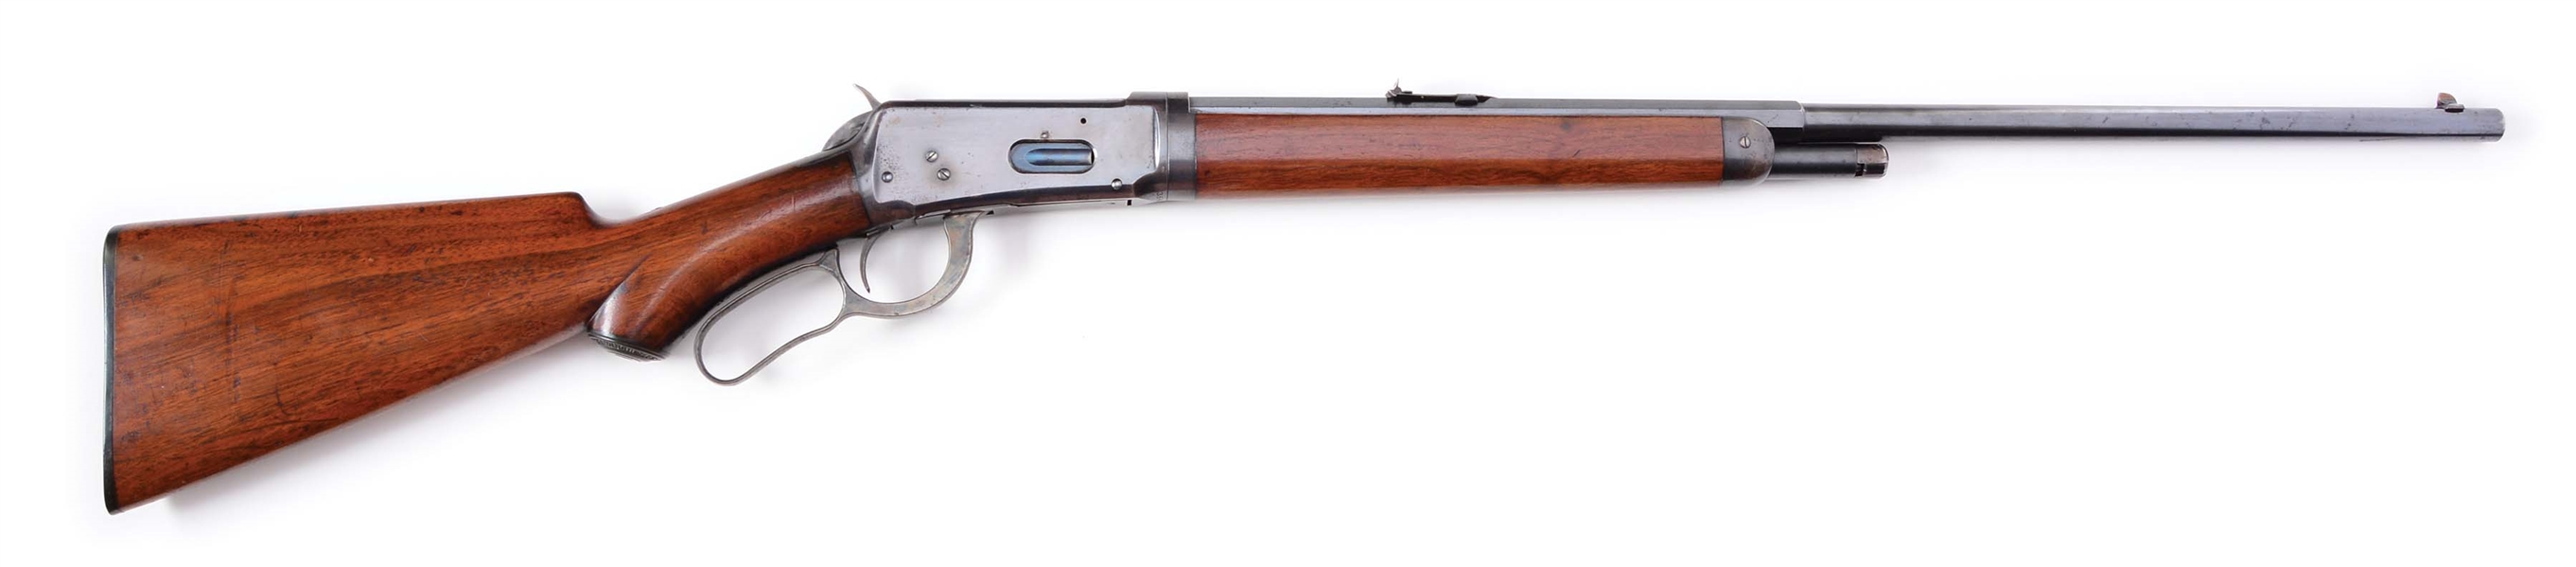 (C) SPECIAL ORDER WINCHESTER MODEL 1894 TAKEDOWN LEVER ACTION RIFLE (1906).